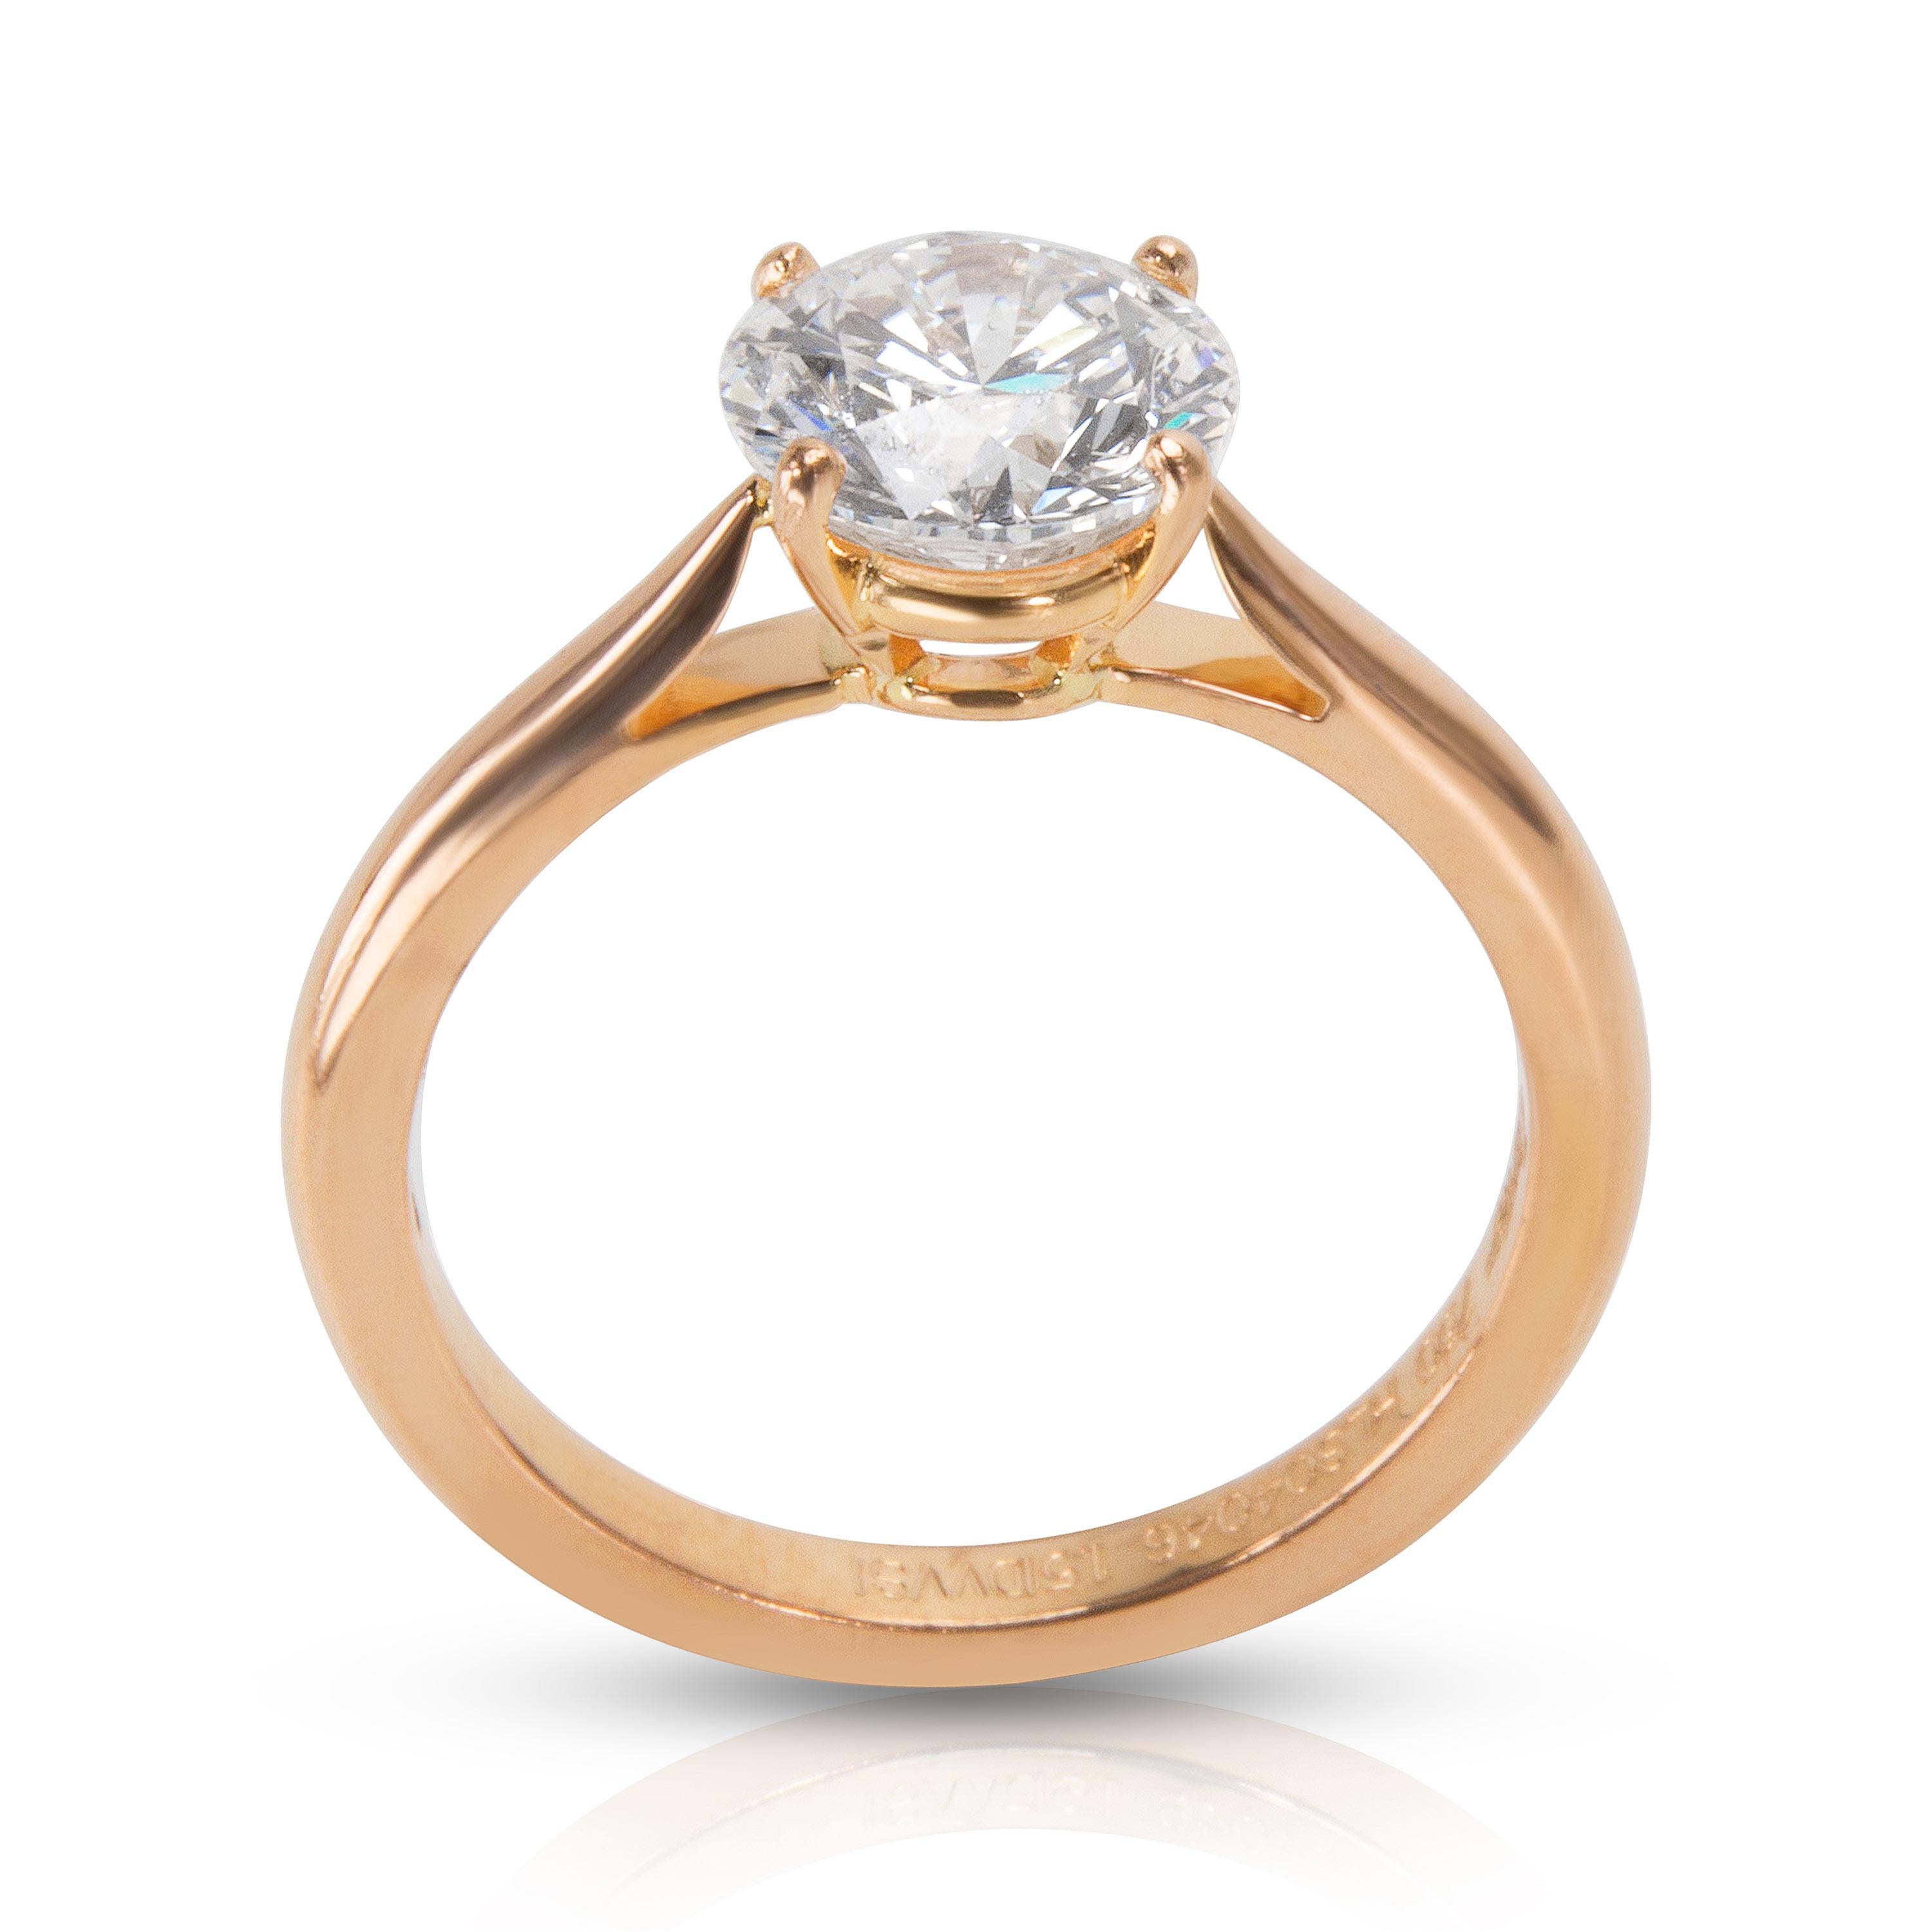 cartier rose gold engagement rings